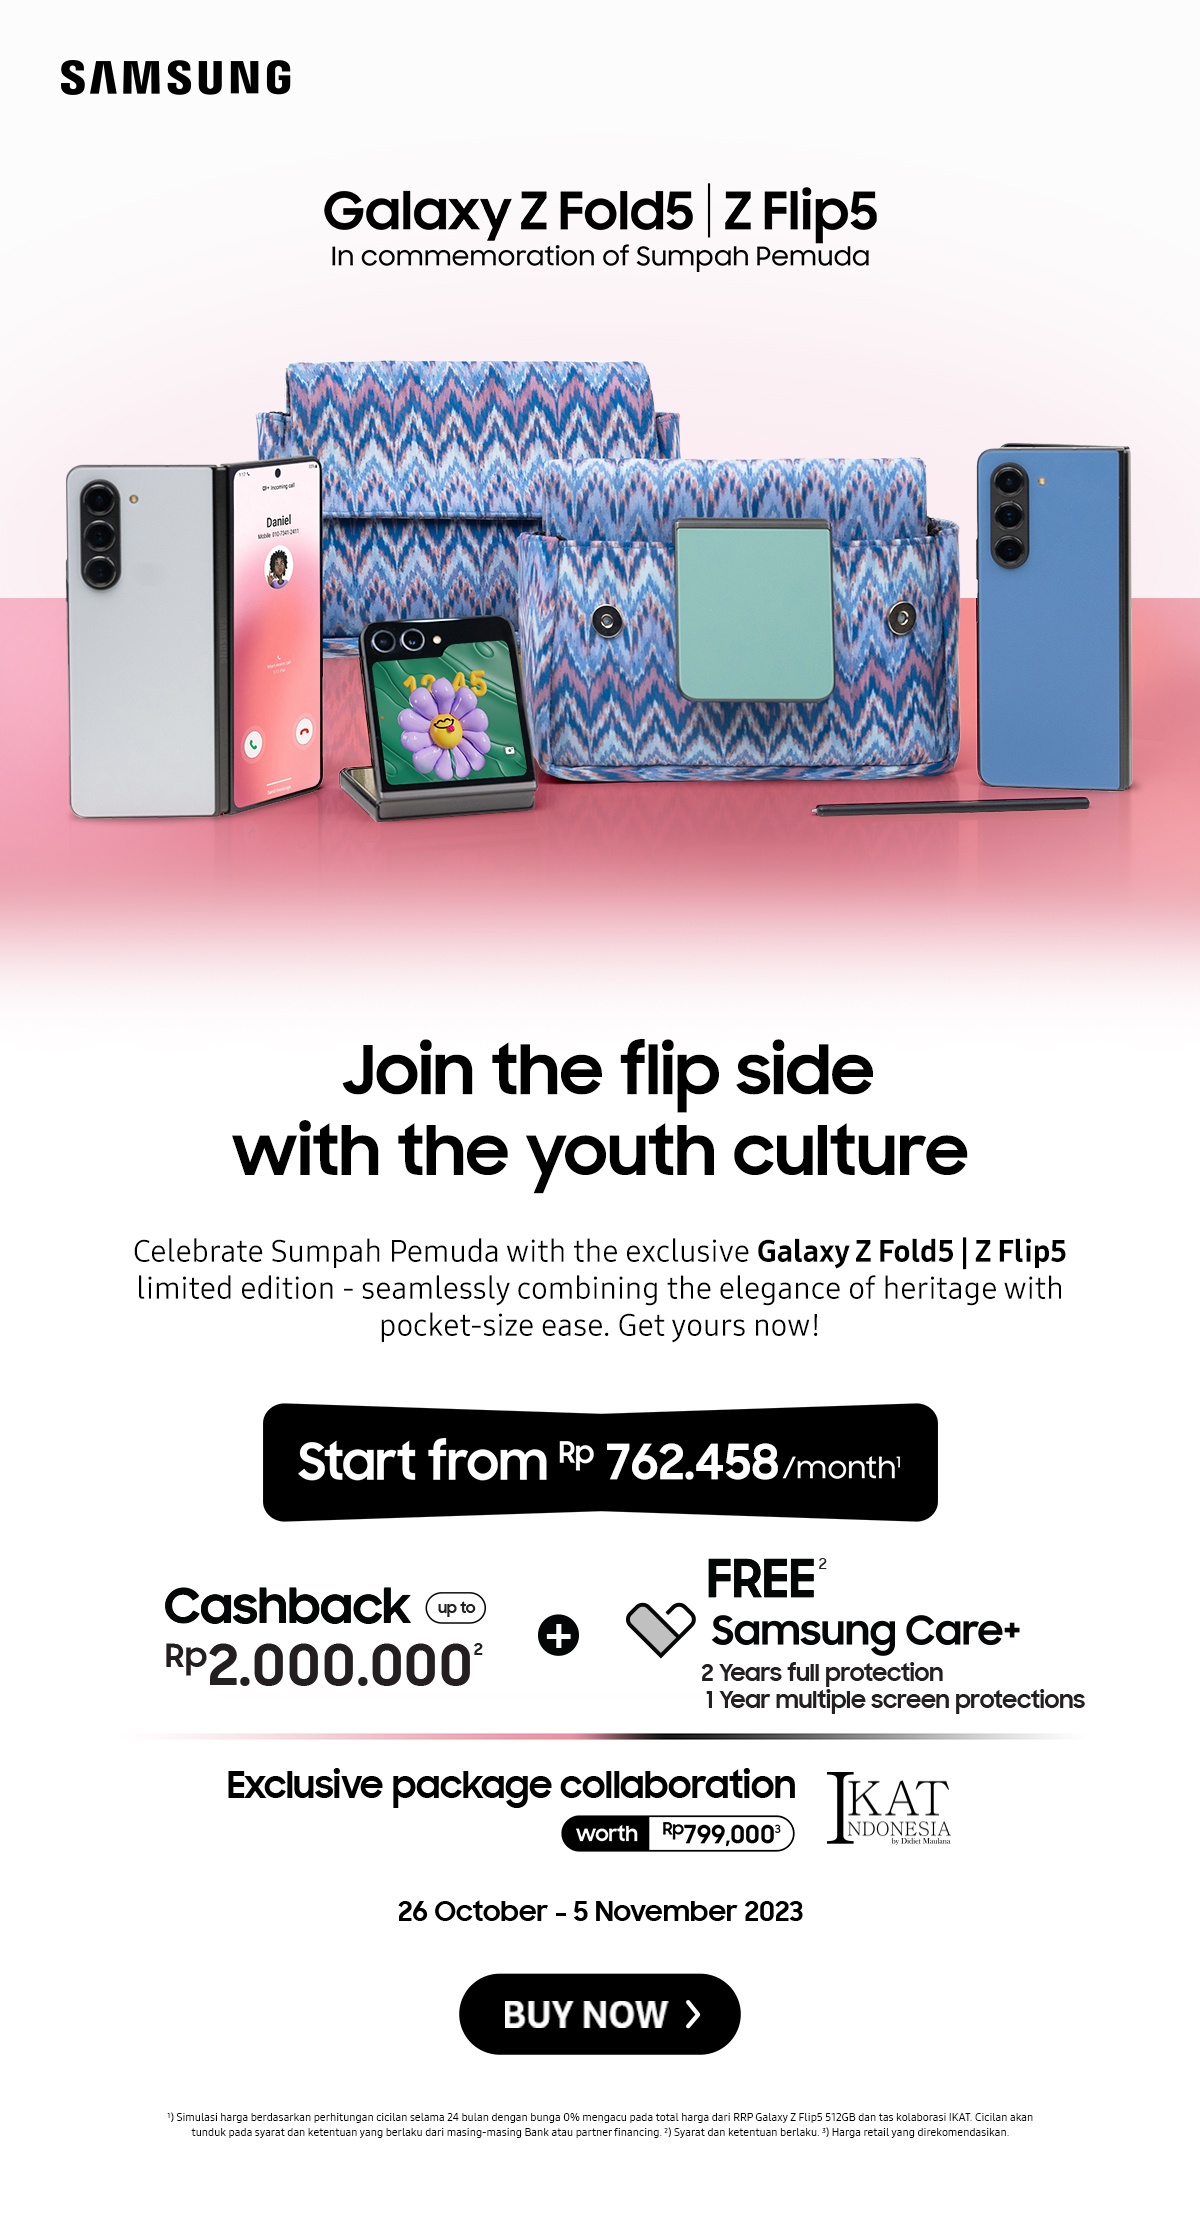 Galaxy Z5 Series in commemoration of Sumpah Pemuda: Join the flip side with the youth culture | Celebrate Sumpah Pemuda with the exclusive Galaxy Z Fold5 | Z Flip5 limited edition - seamlessly combining the elegance of heritage with pocket-size ease. Click here to get yours now!